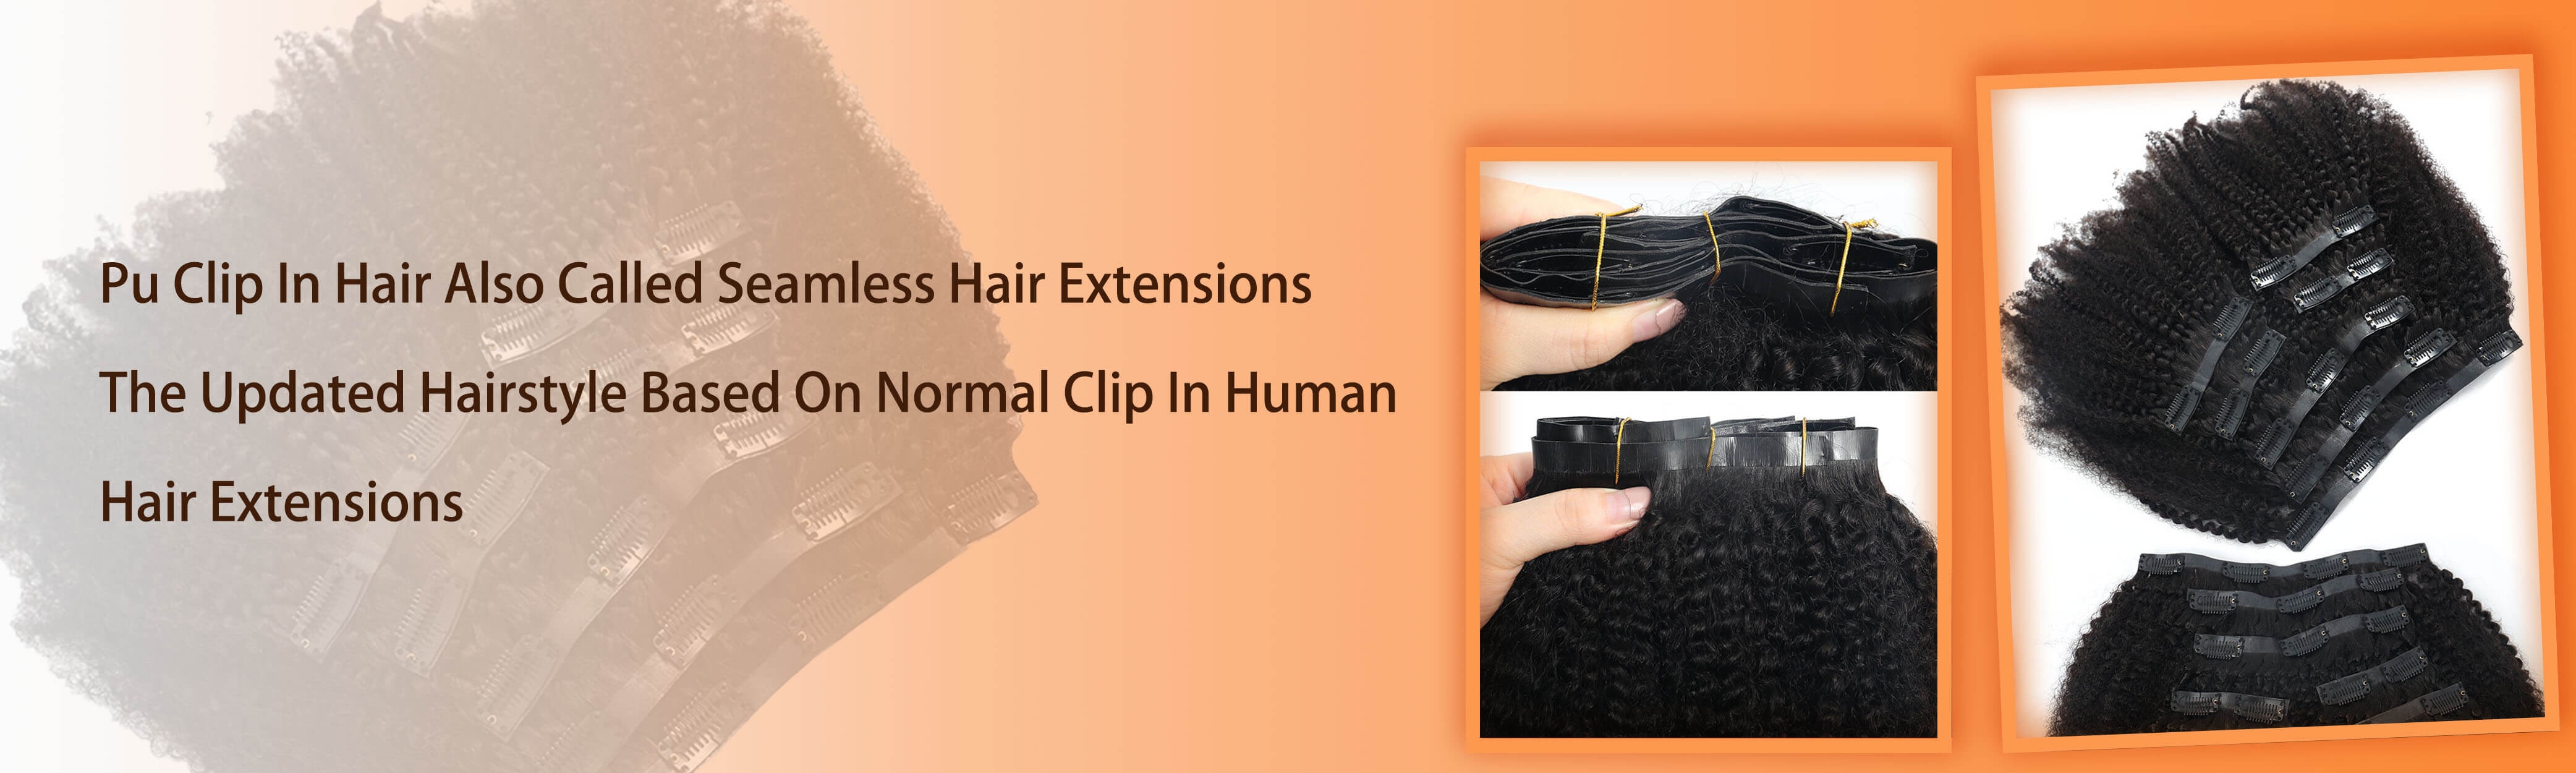 Pu Clip In Hair Extensions